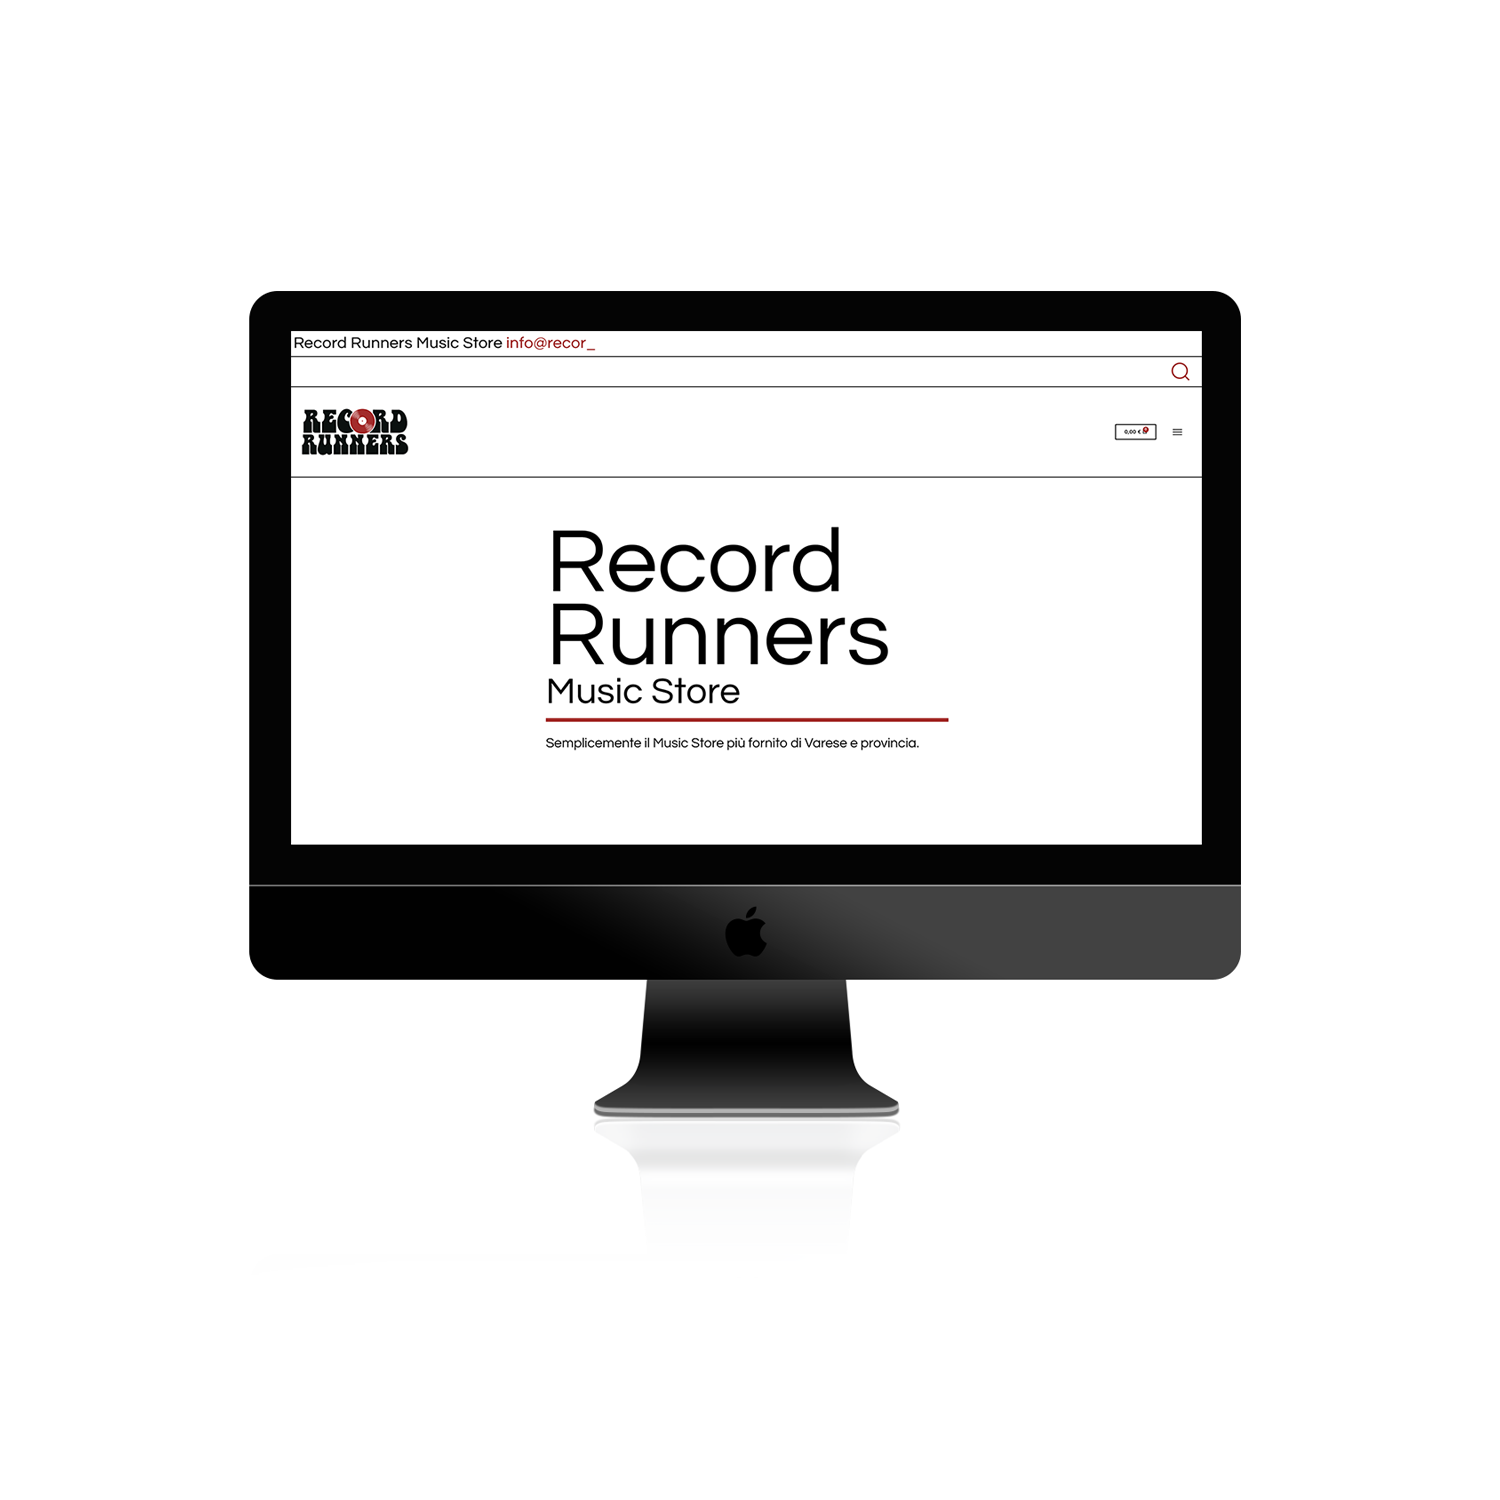 diego-cinquegrana-the-golden-torch-web-design-record-runners-music-store-varese-1